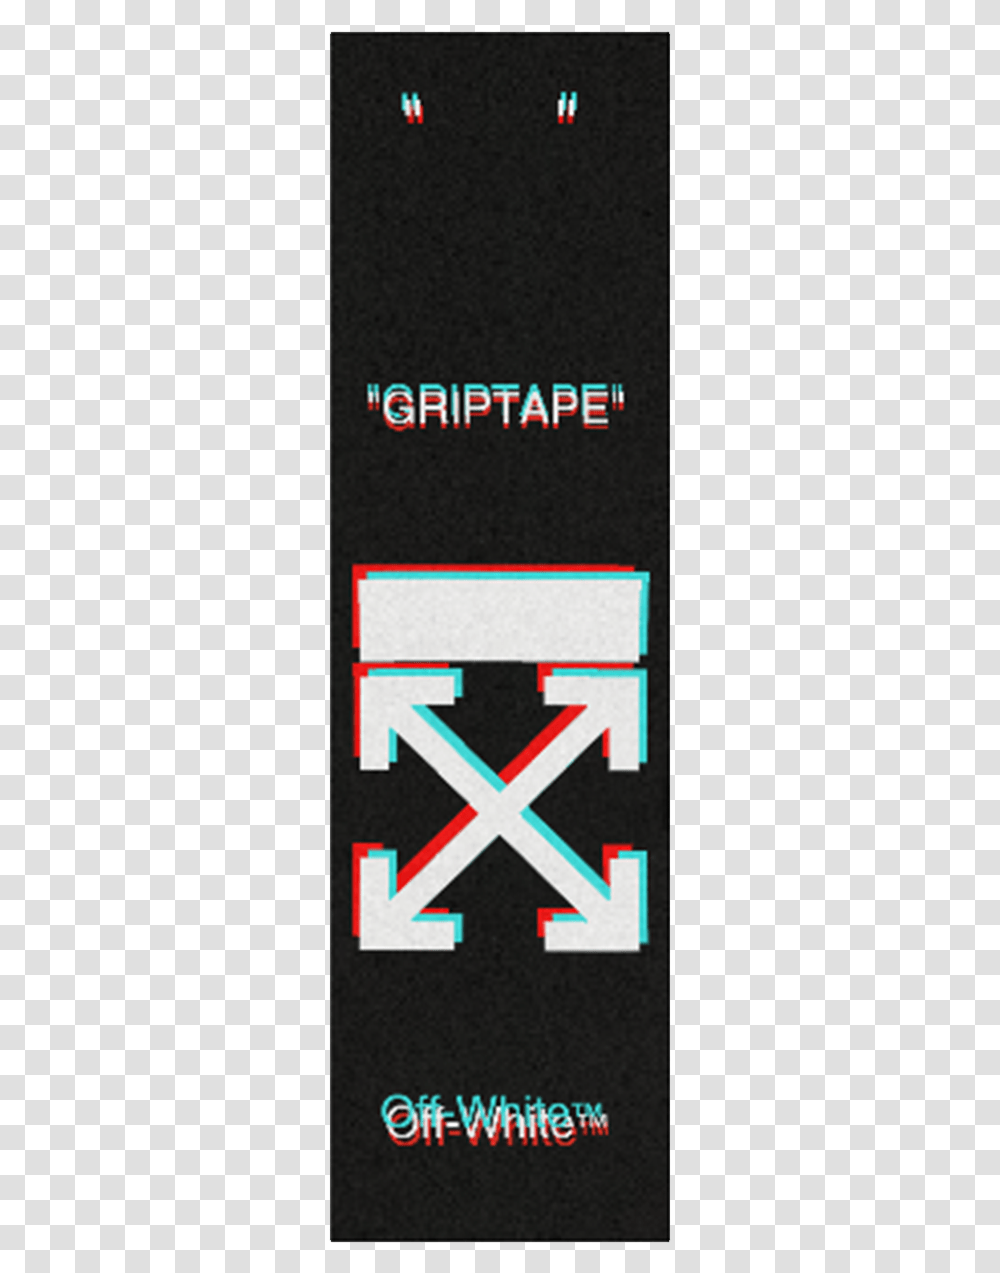 Image Of Glitch Off White Griptape Off White Grip Tape, Label, Alphabet, Word Transparent Png